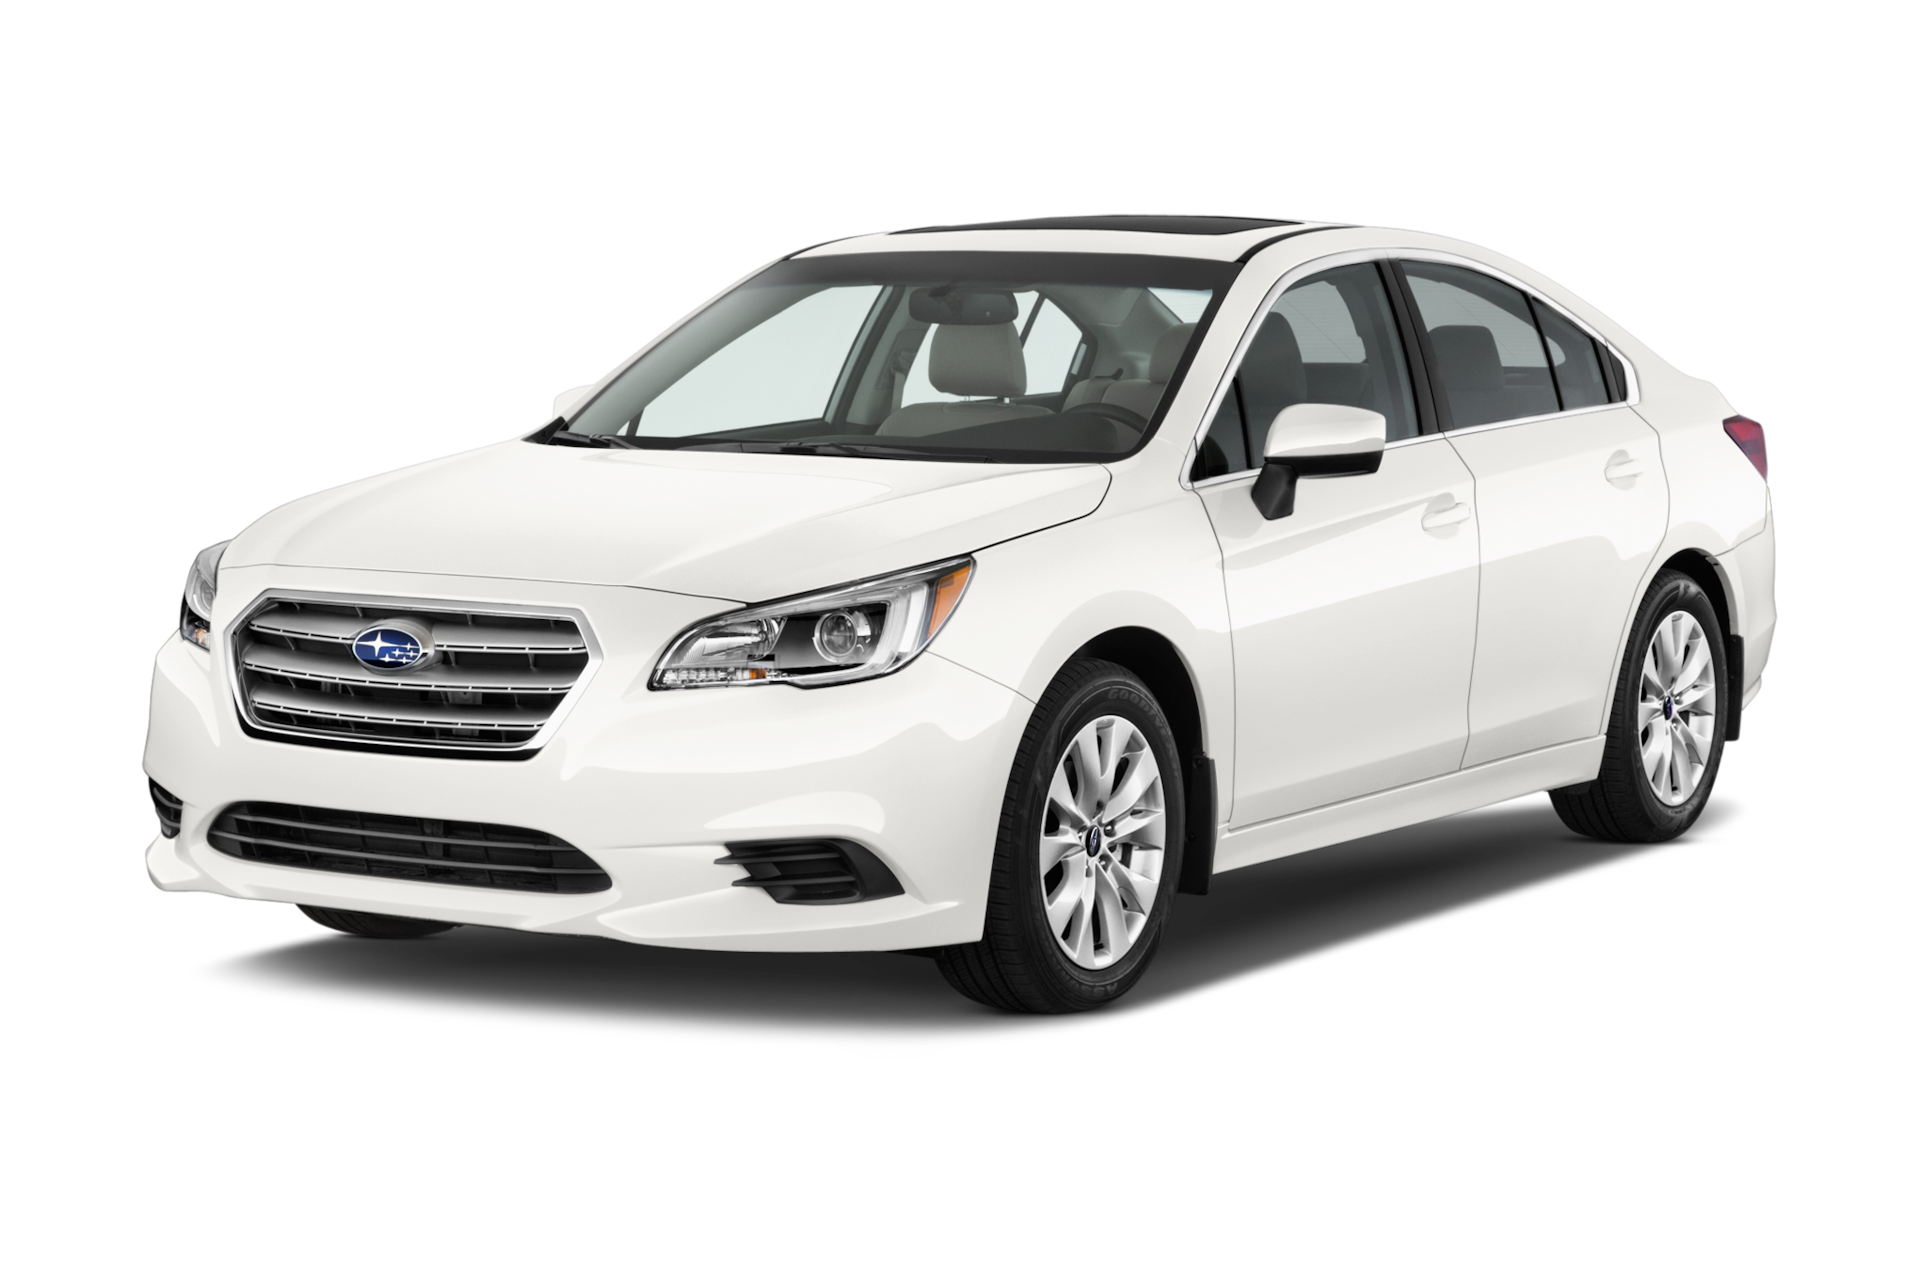 2015 Subaru Legacy Prices, Reviews, and Photos - MotorTrend